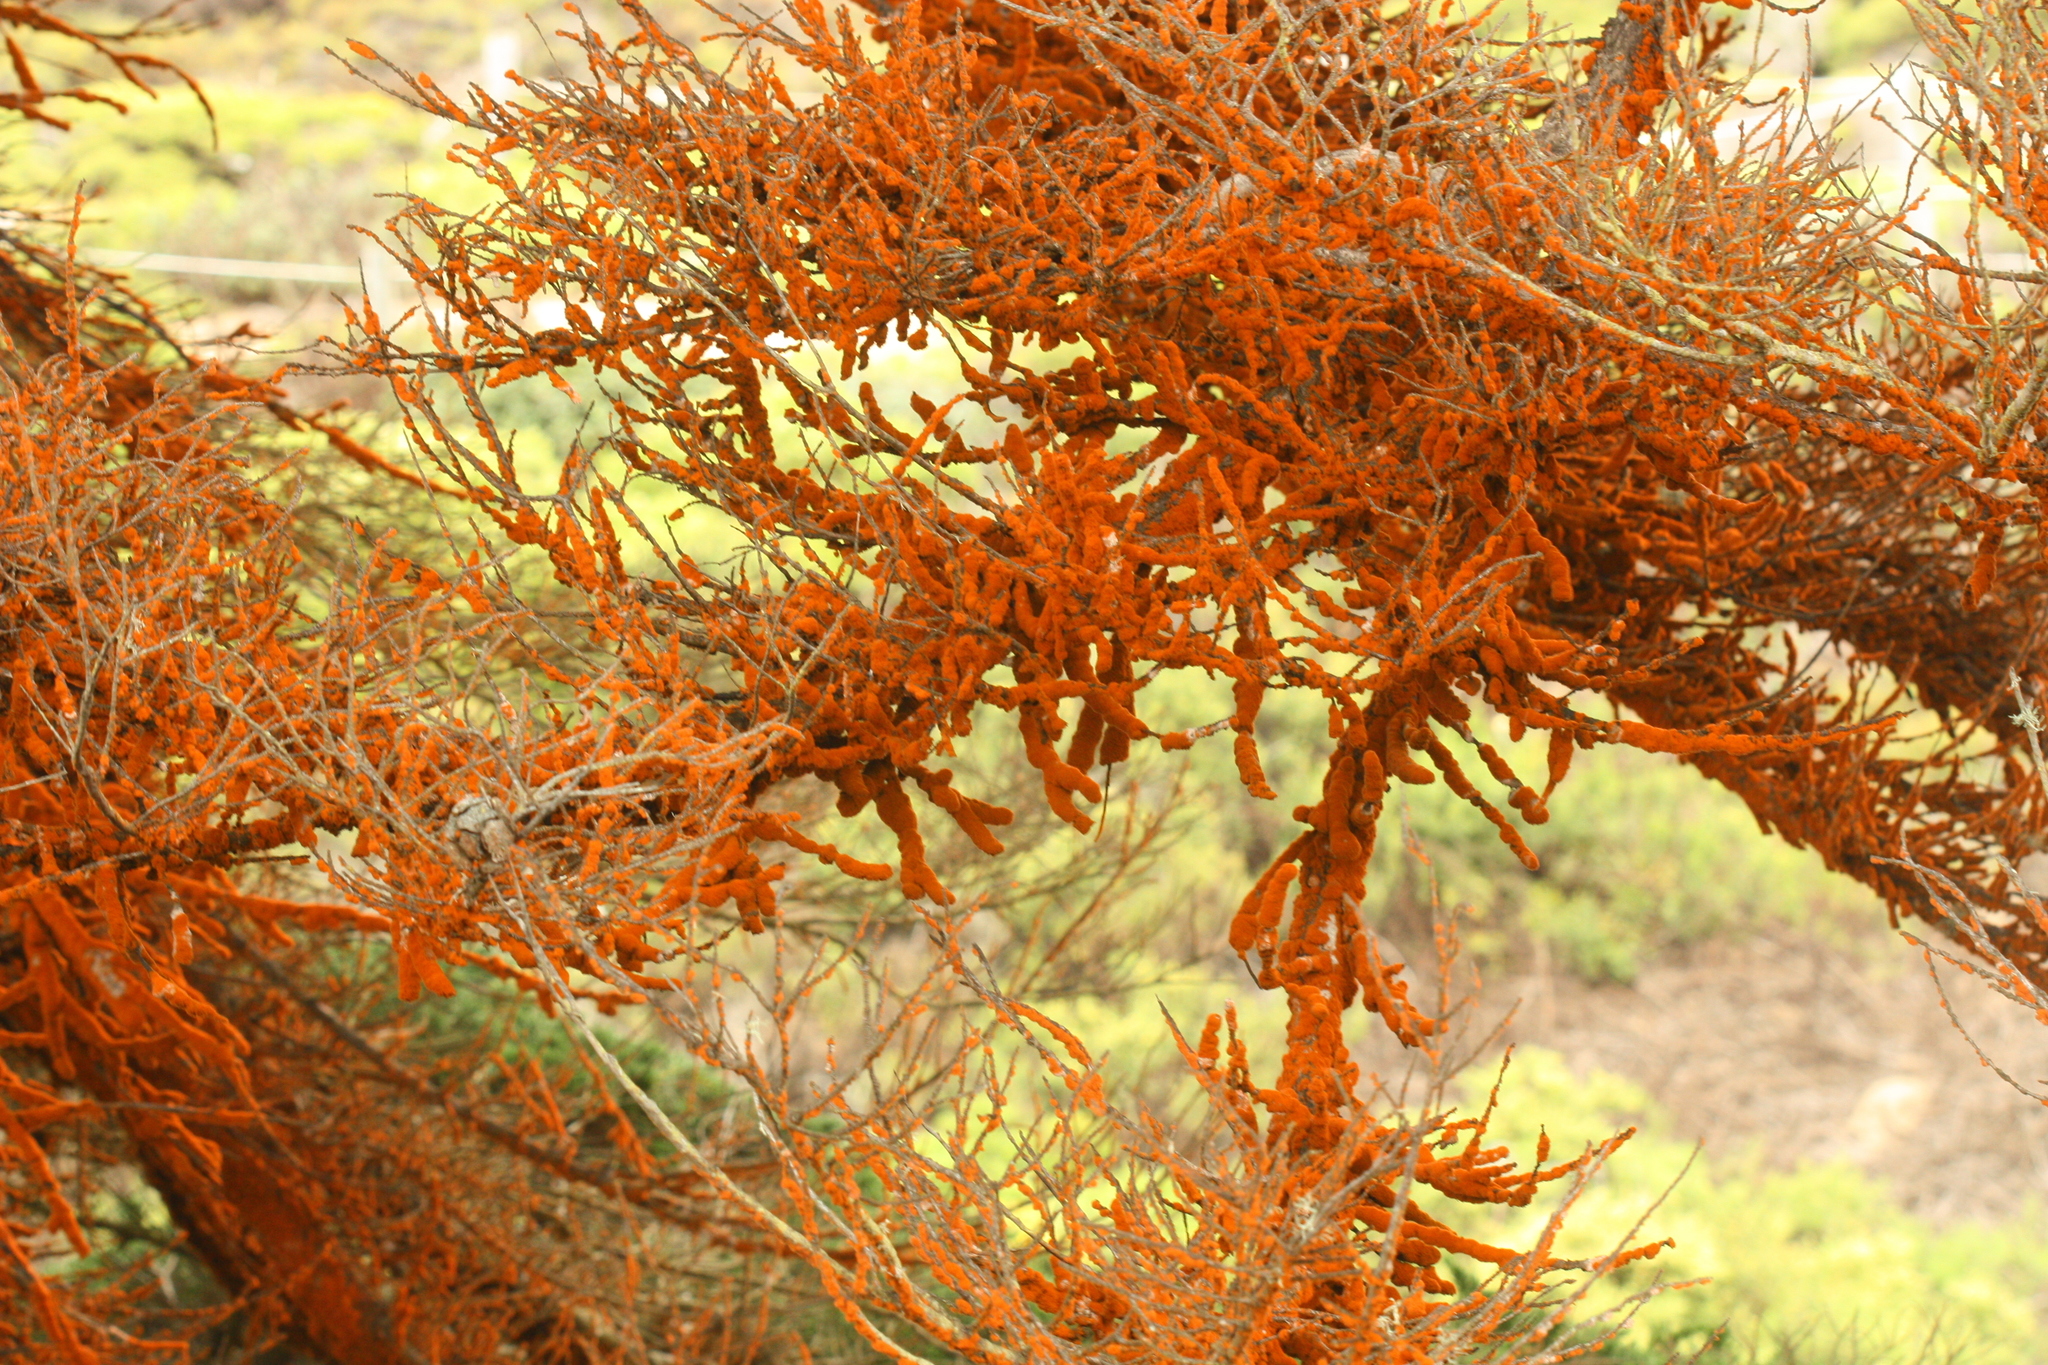 Branches of a tree covered with fuzzy orange algae